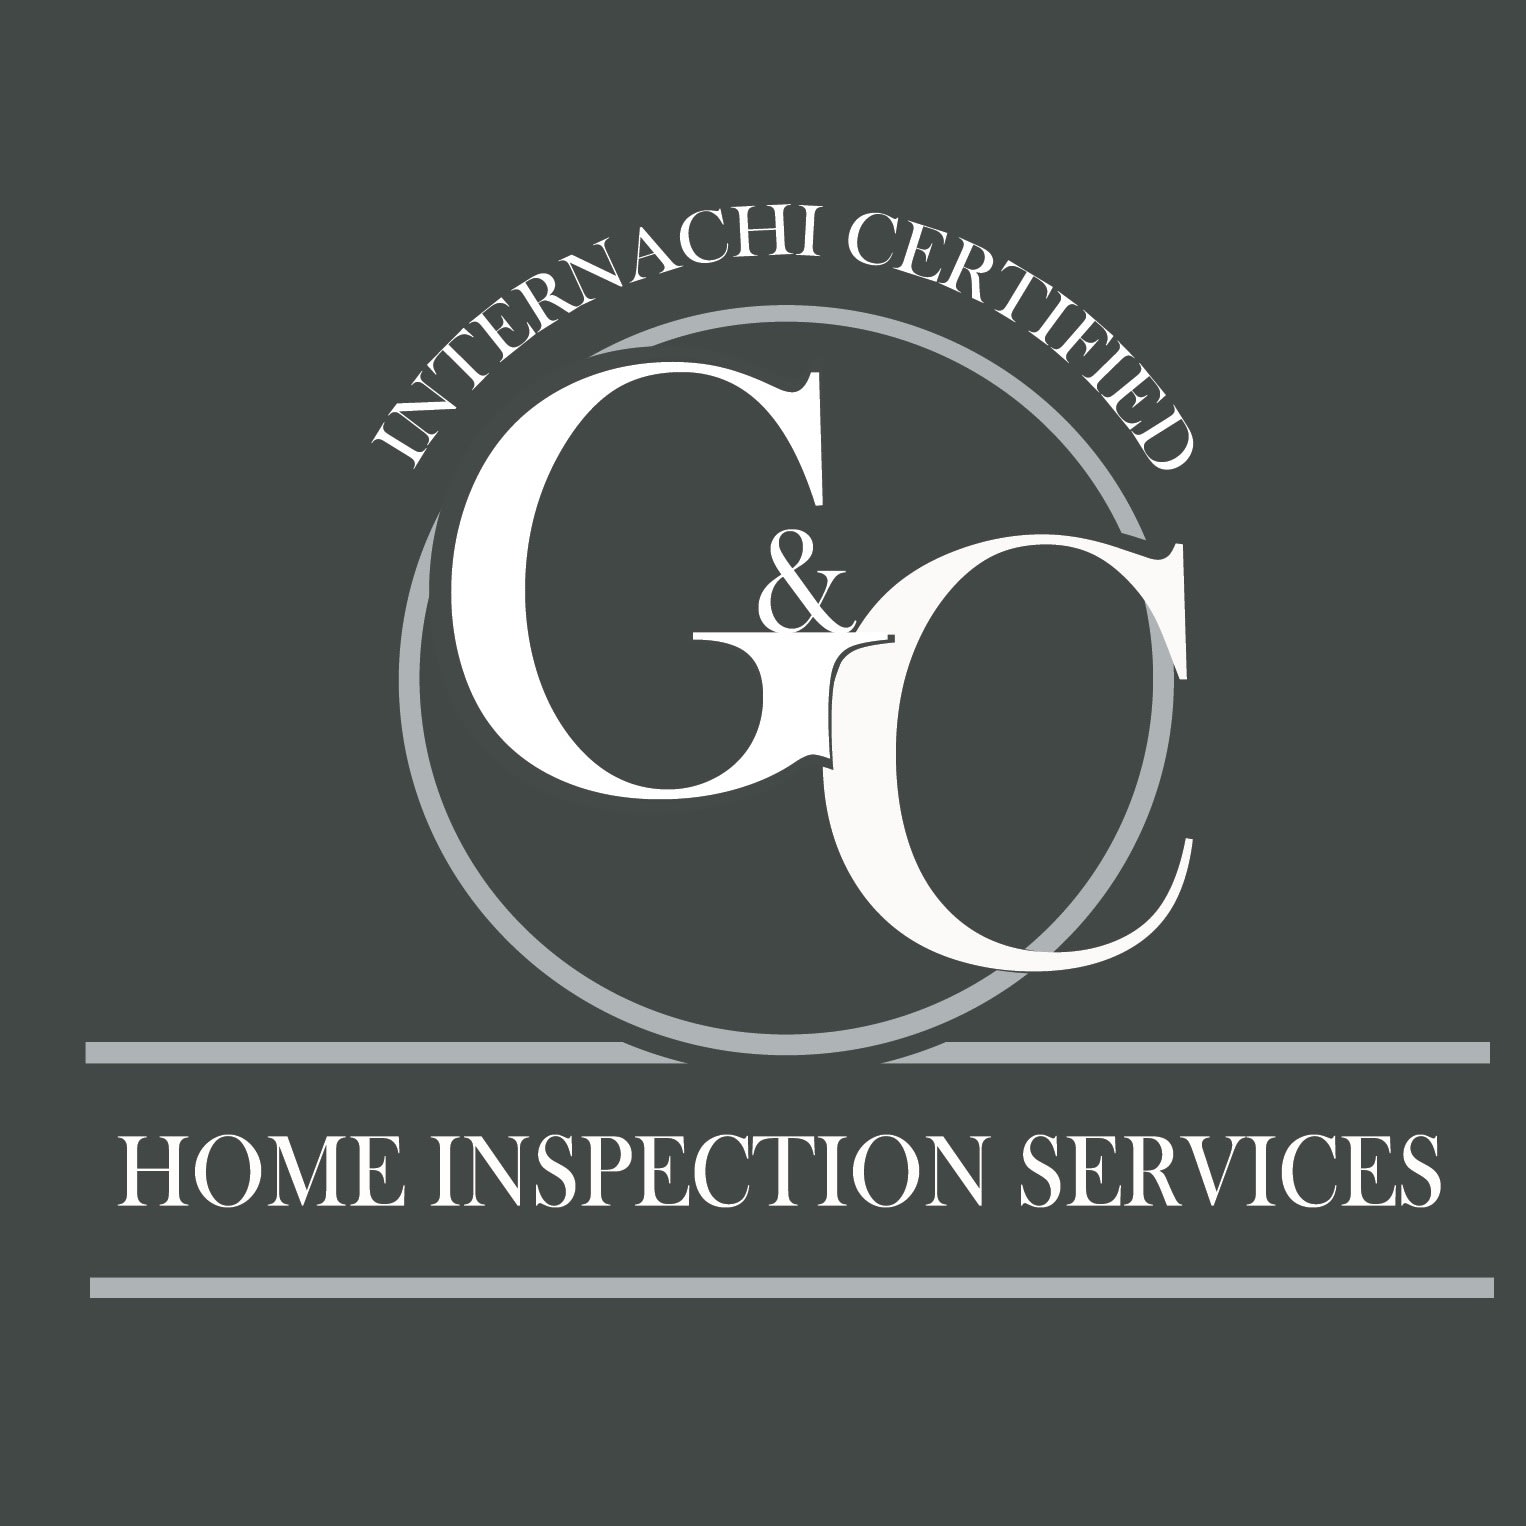 G & C Home Inspection Services Logo